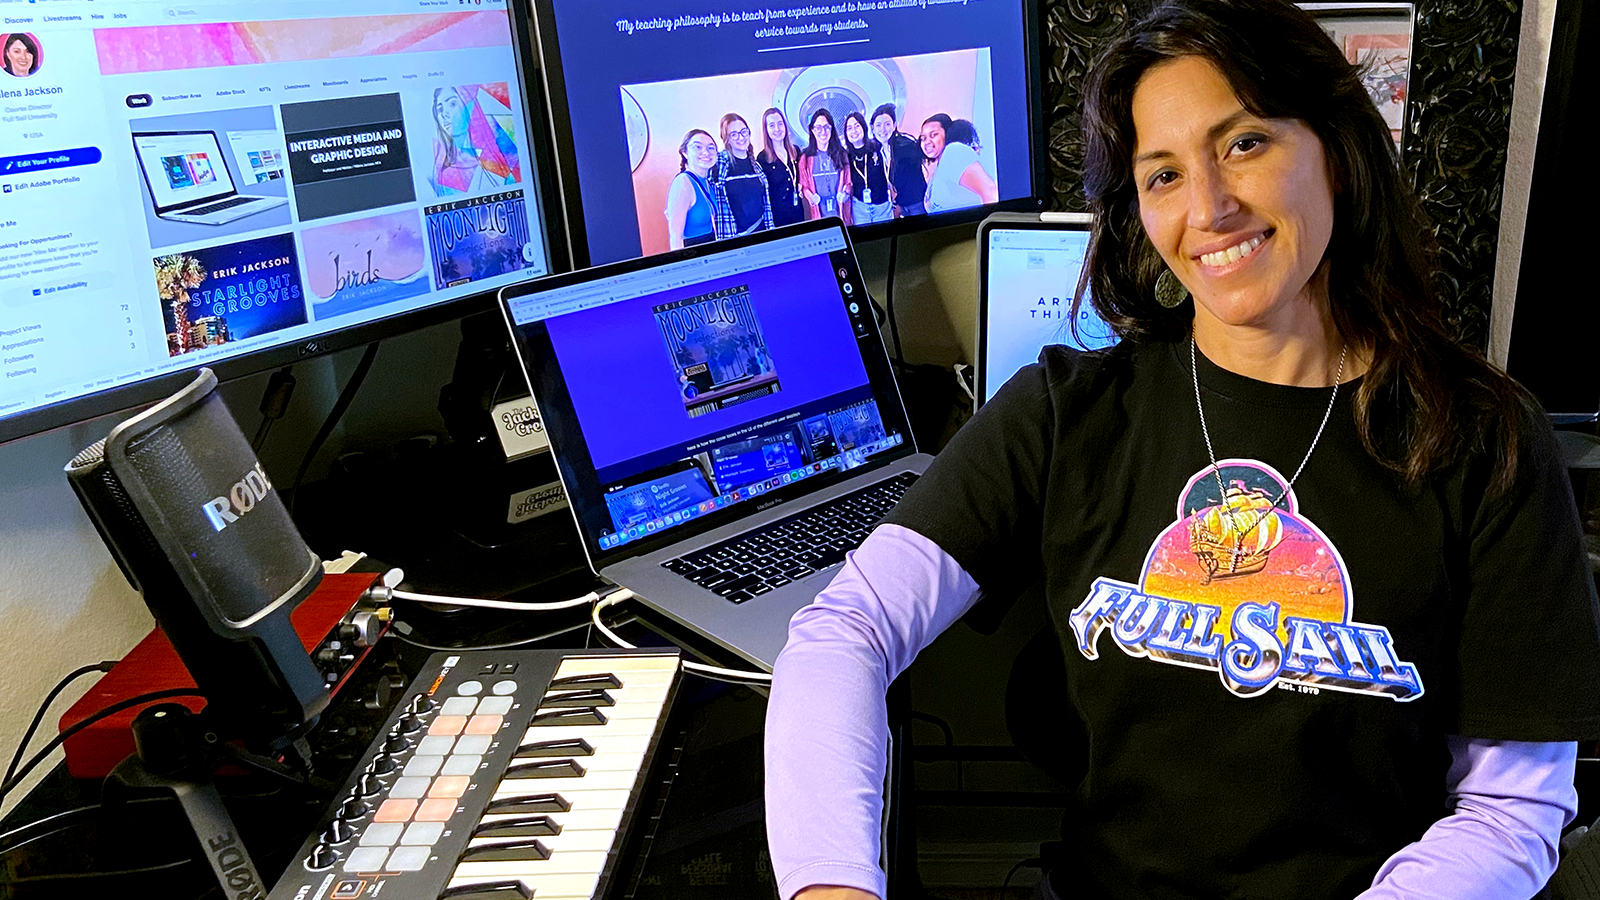 Instructor Milena Jackson, a woman with shoulder-length dark hair, is seated at her desk while wearing a Full Sail University graphic tee.